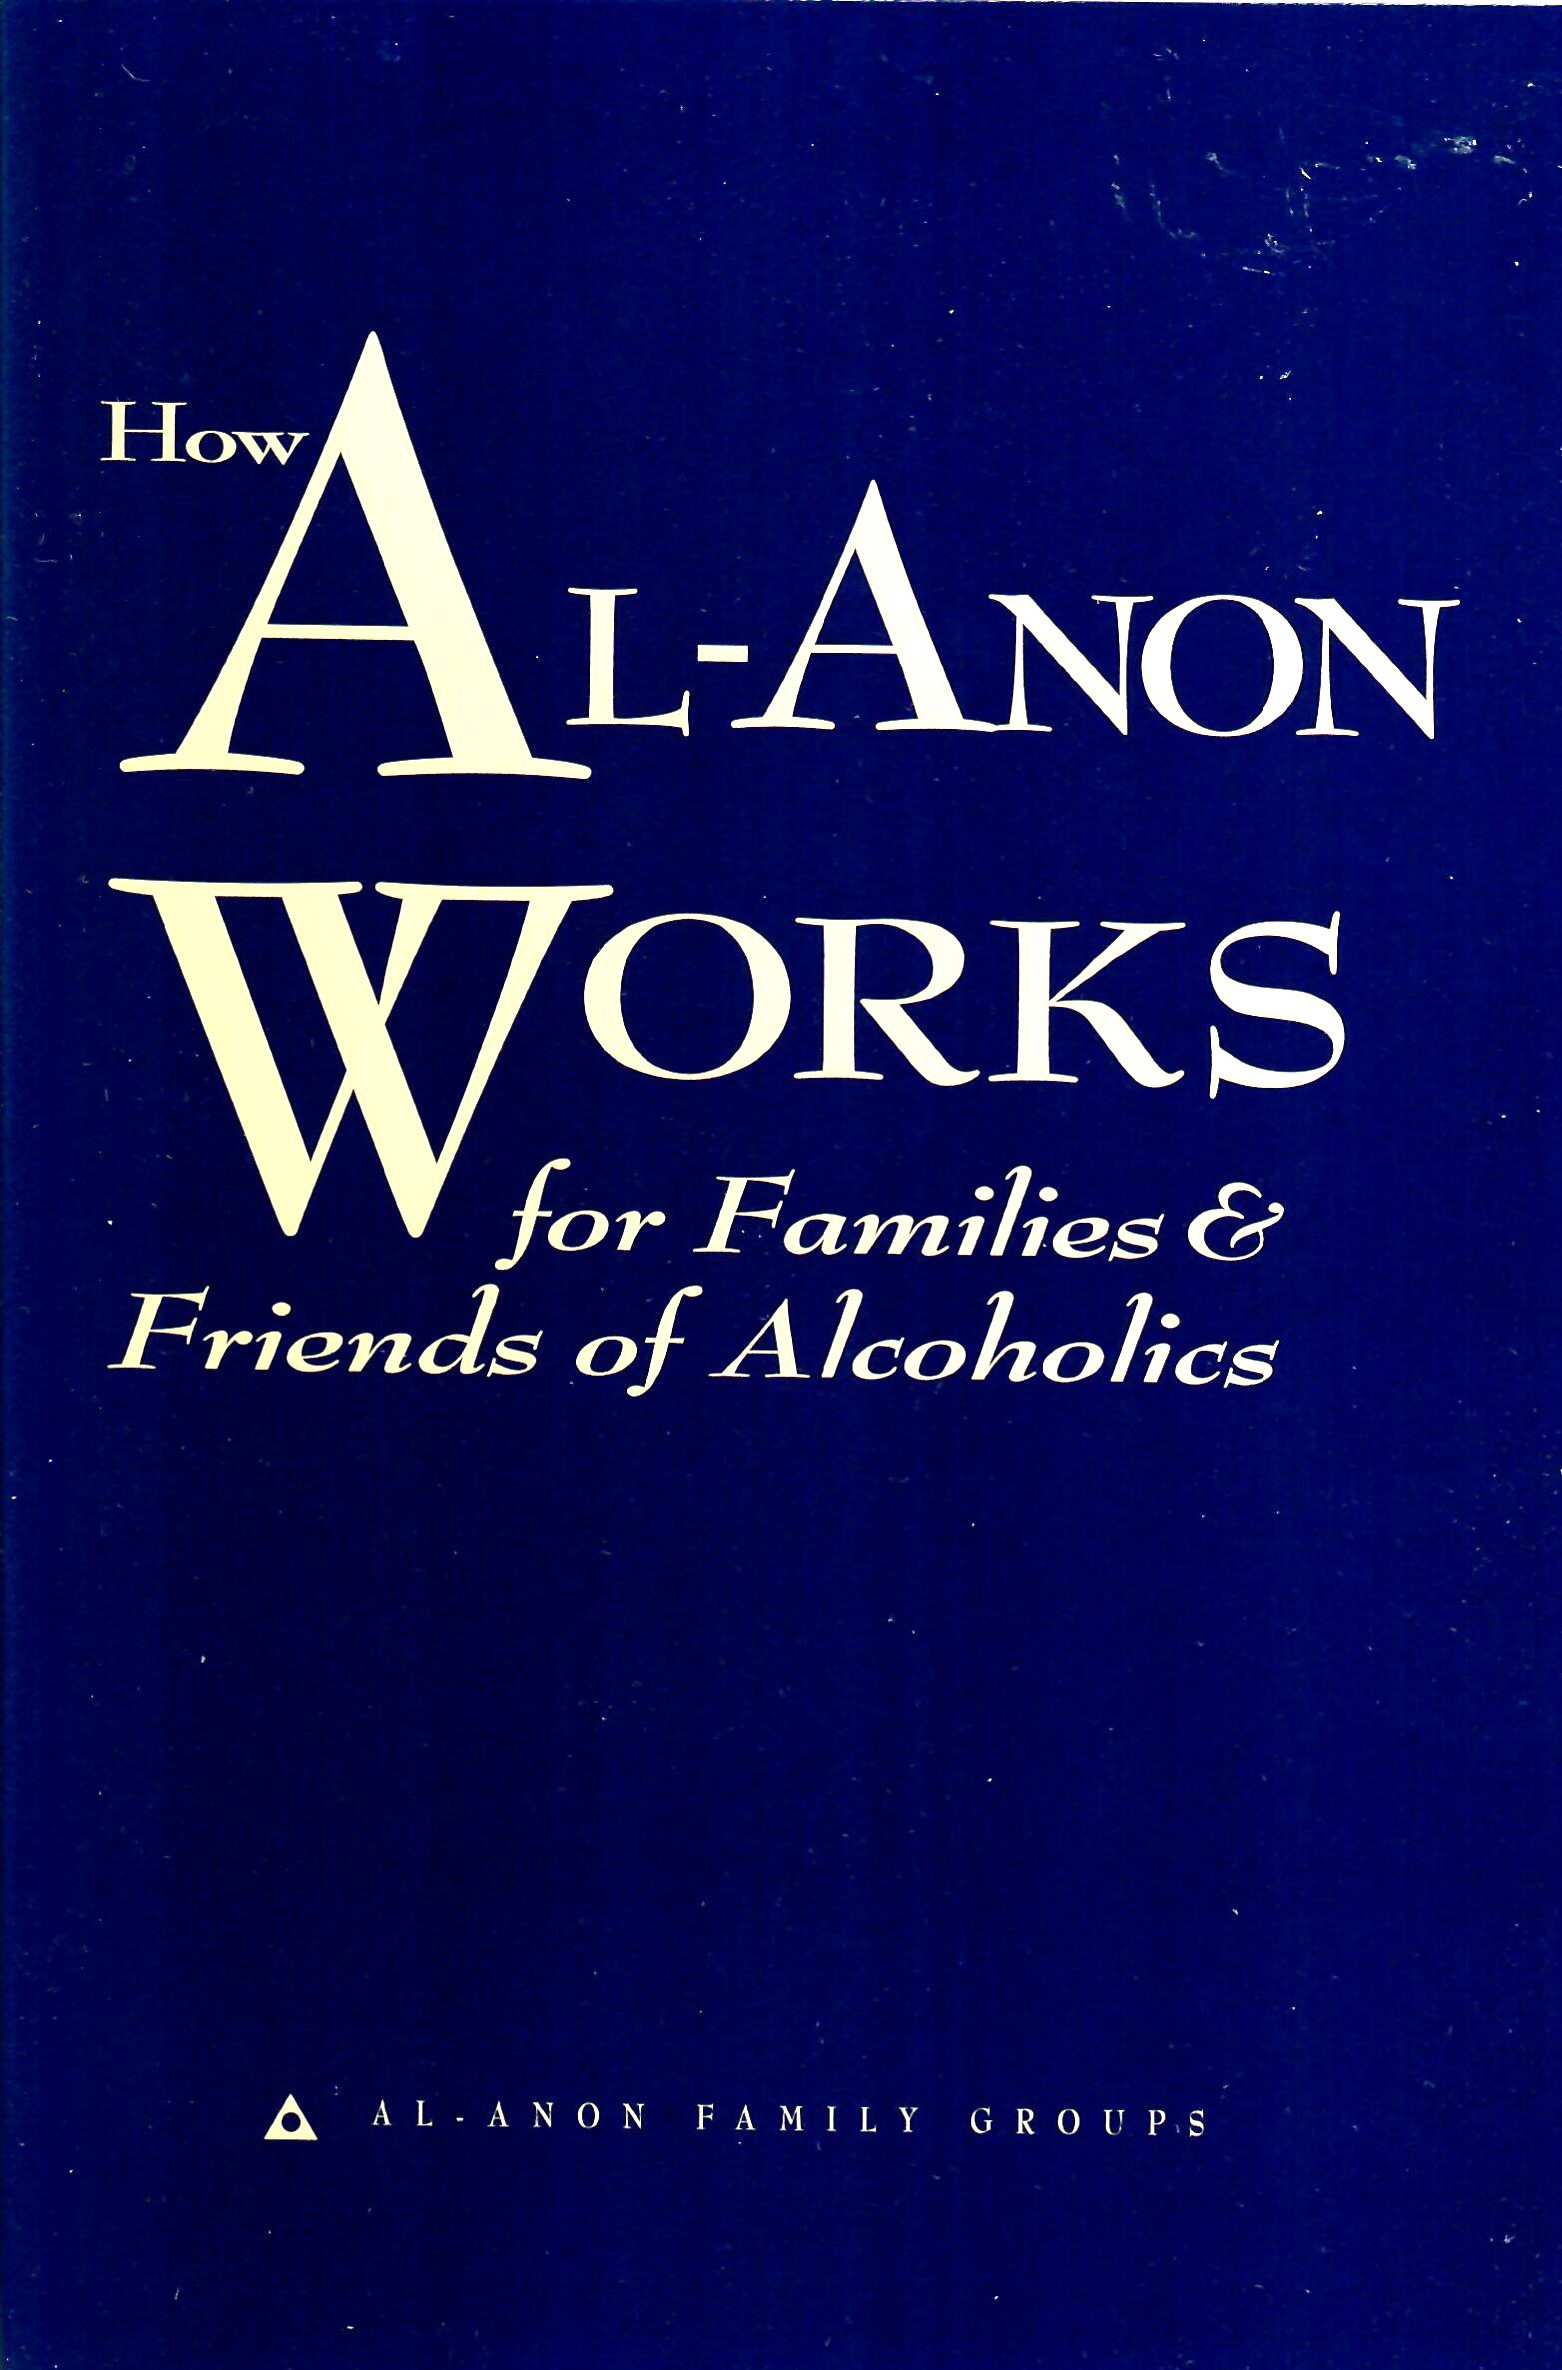 How Al-Anon Works for Families & Friends of Alcoholics (Softcover) B-32